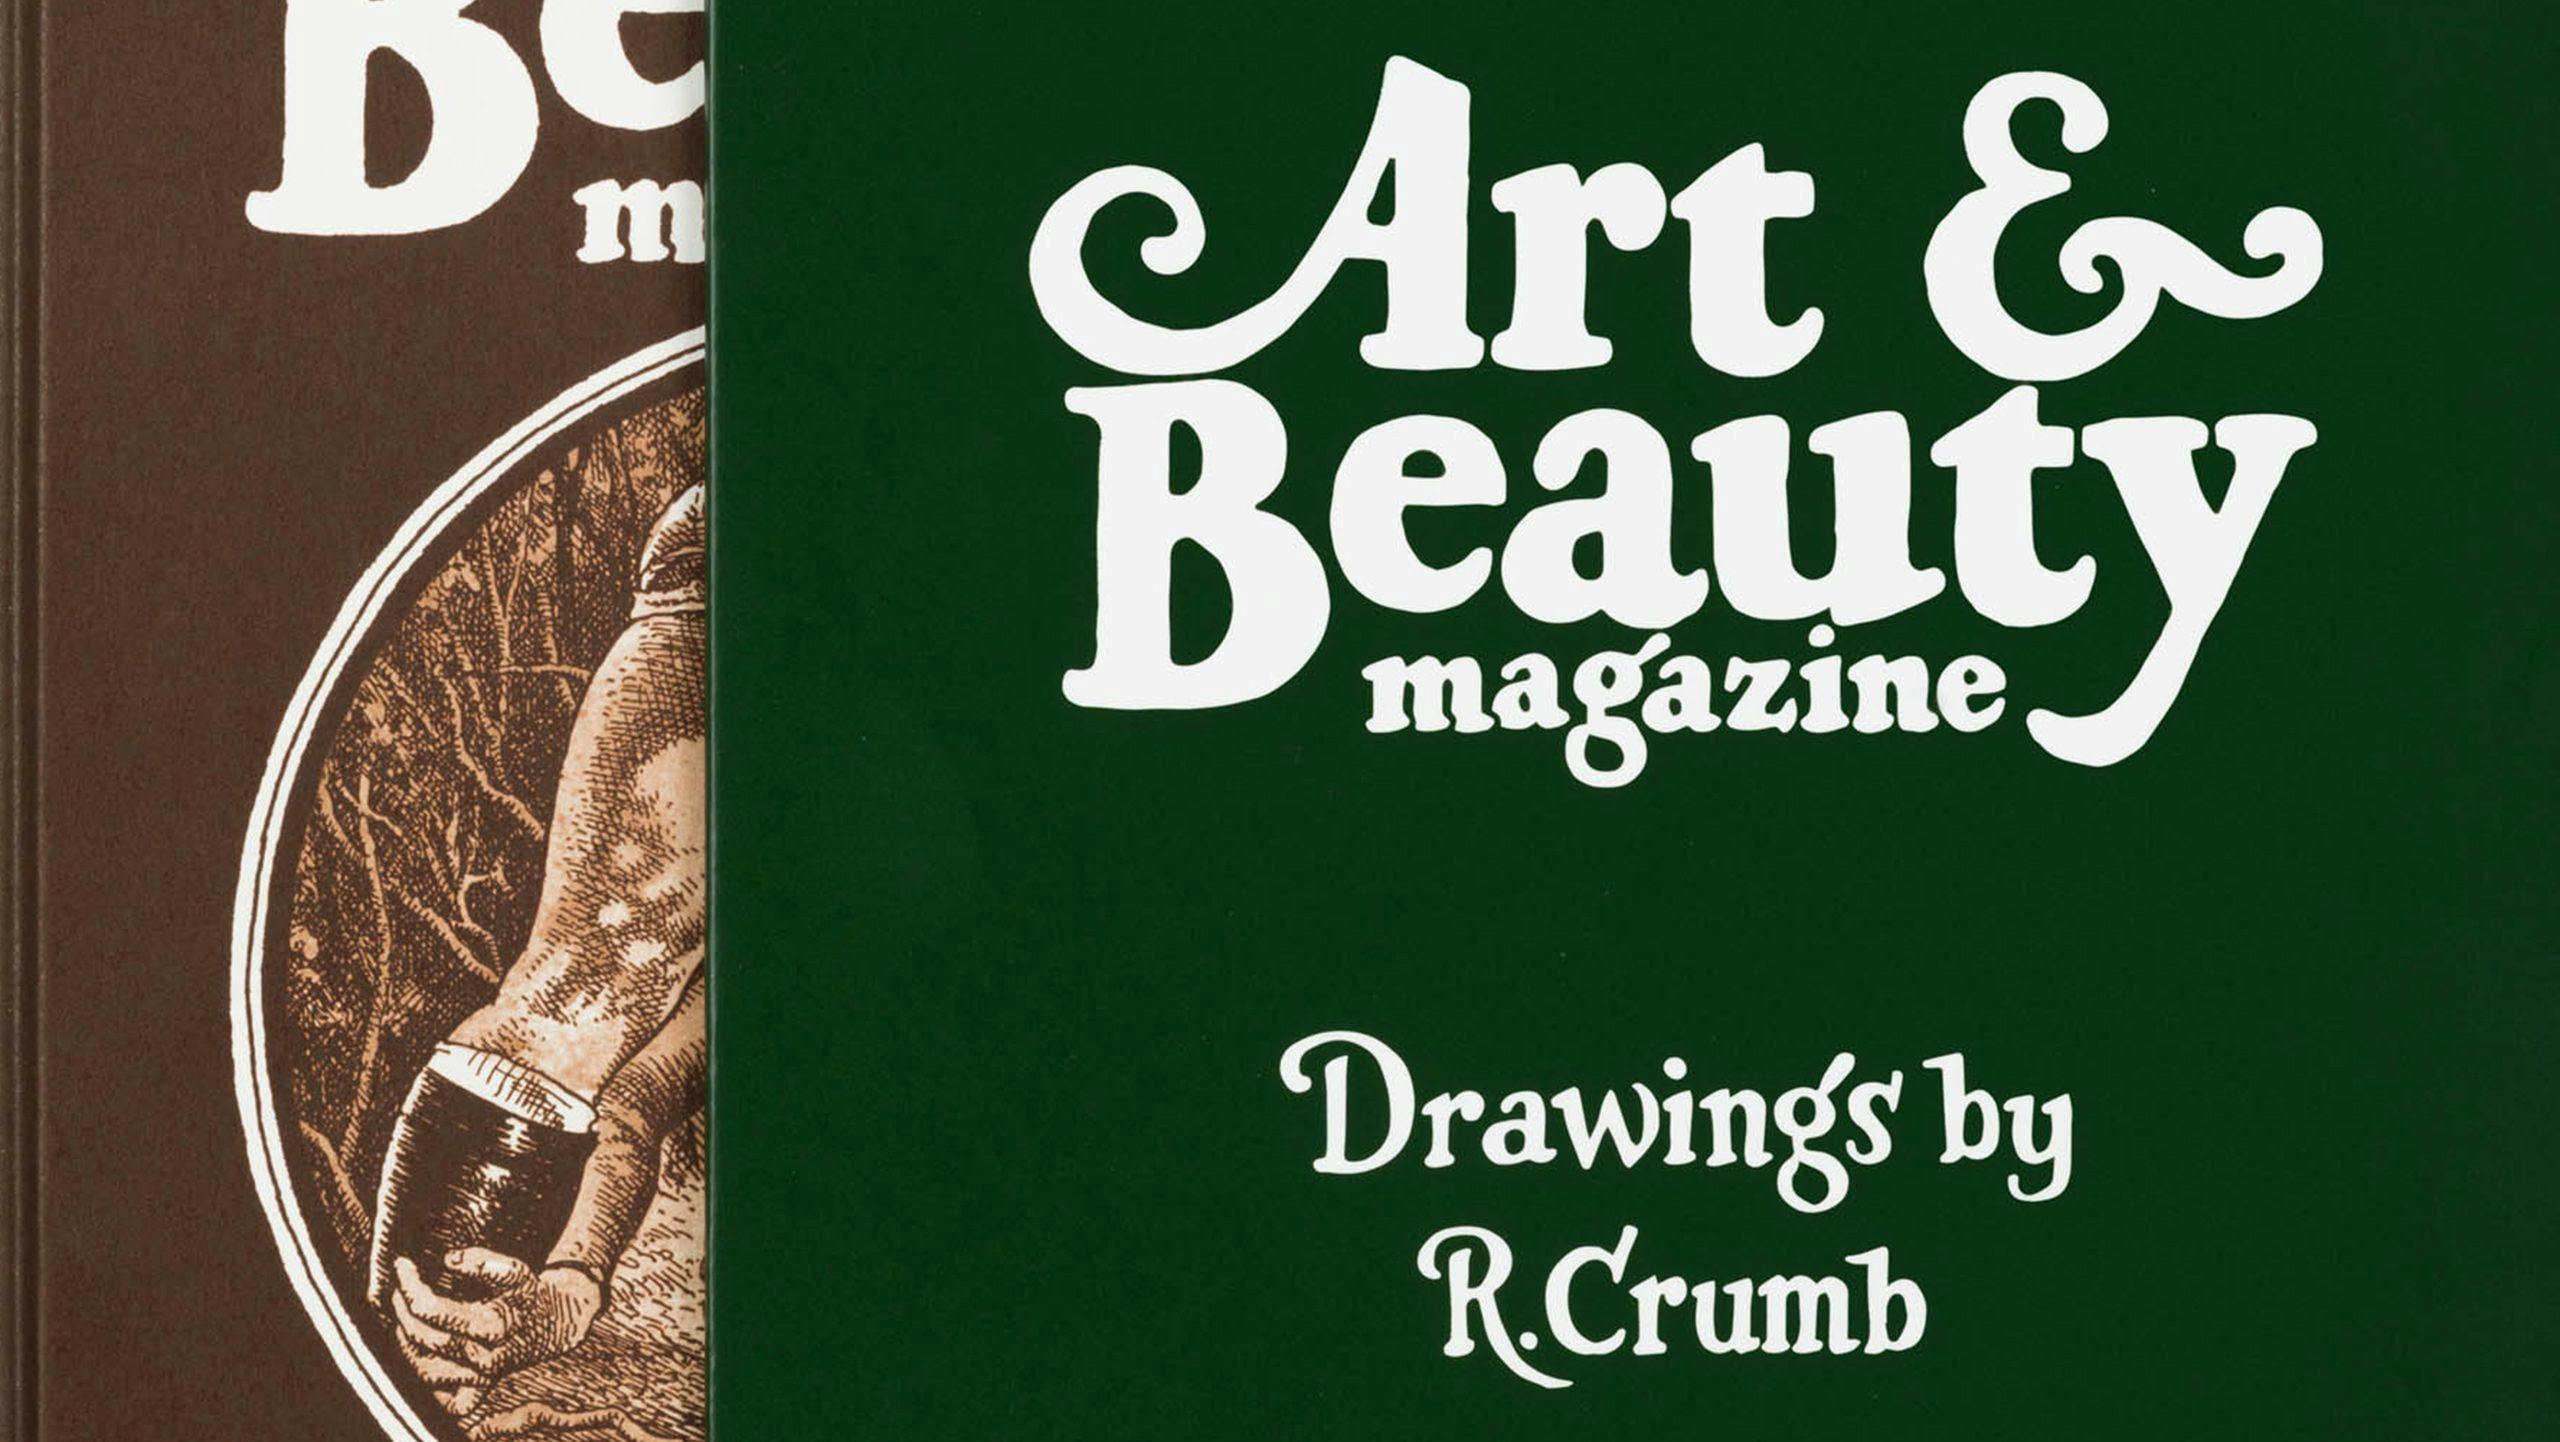 Art & Beauty Magazine: Drawings by R. Crumb special limited edition